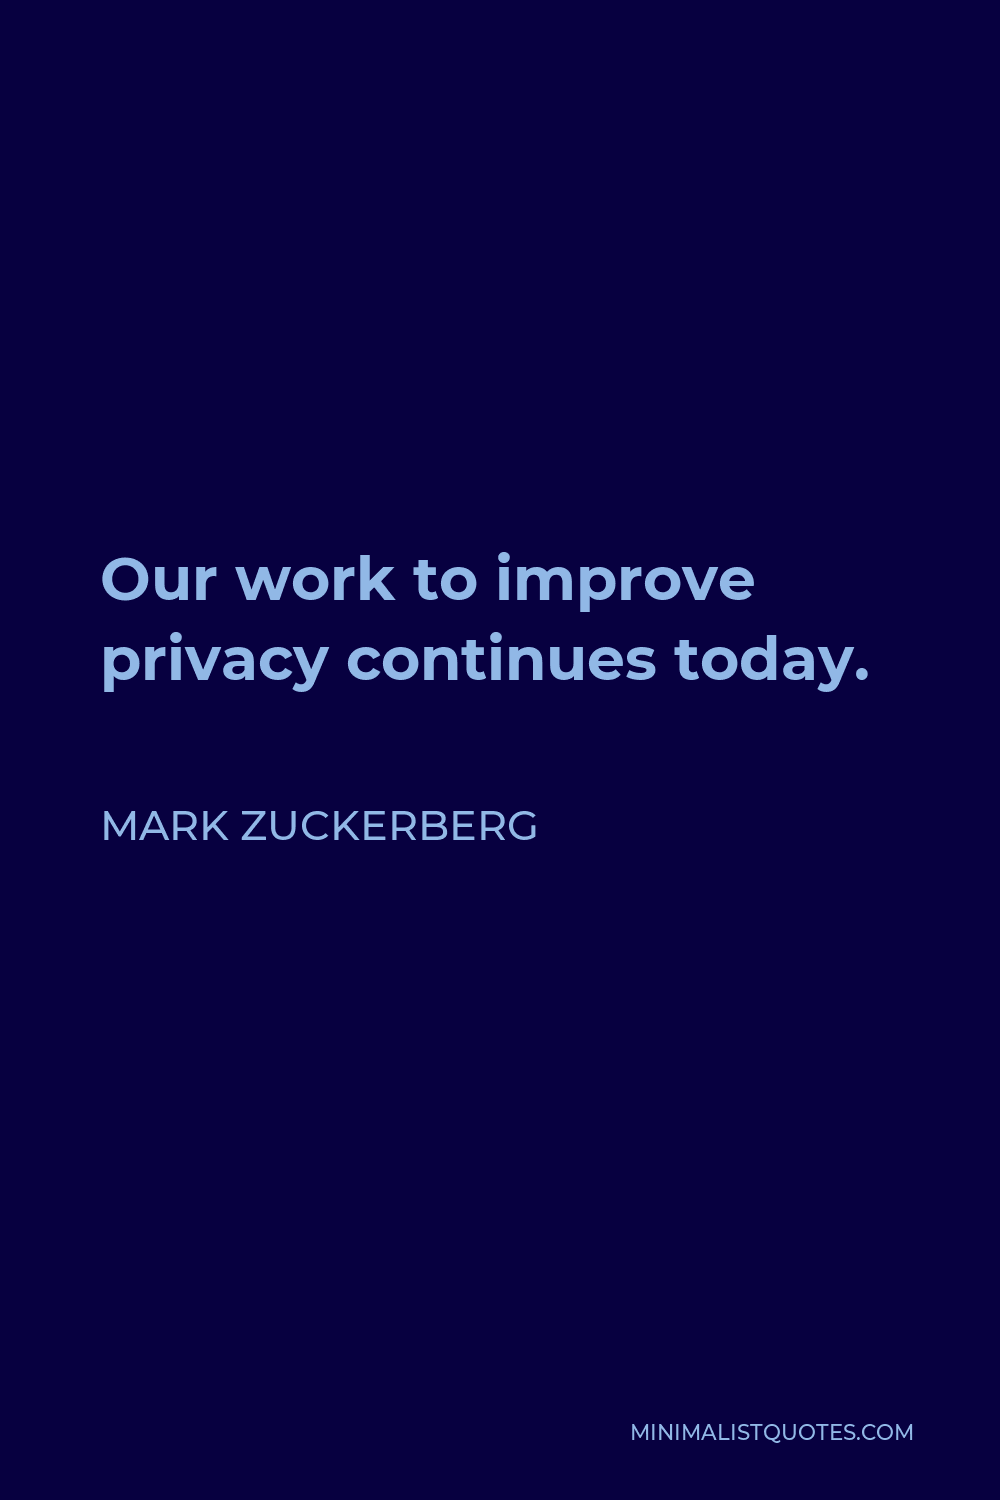 Mark Zuckerberg Quote - Our work to improve privacy continues today.